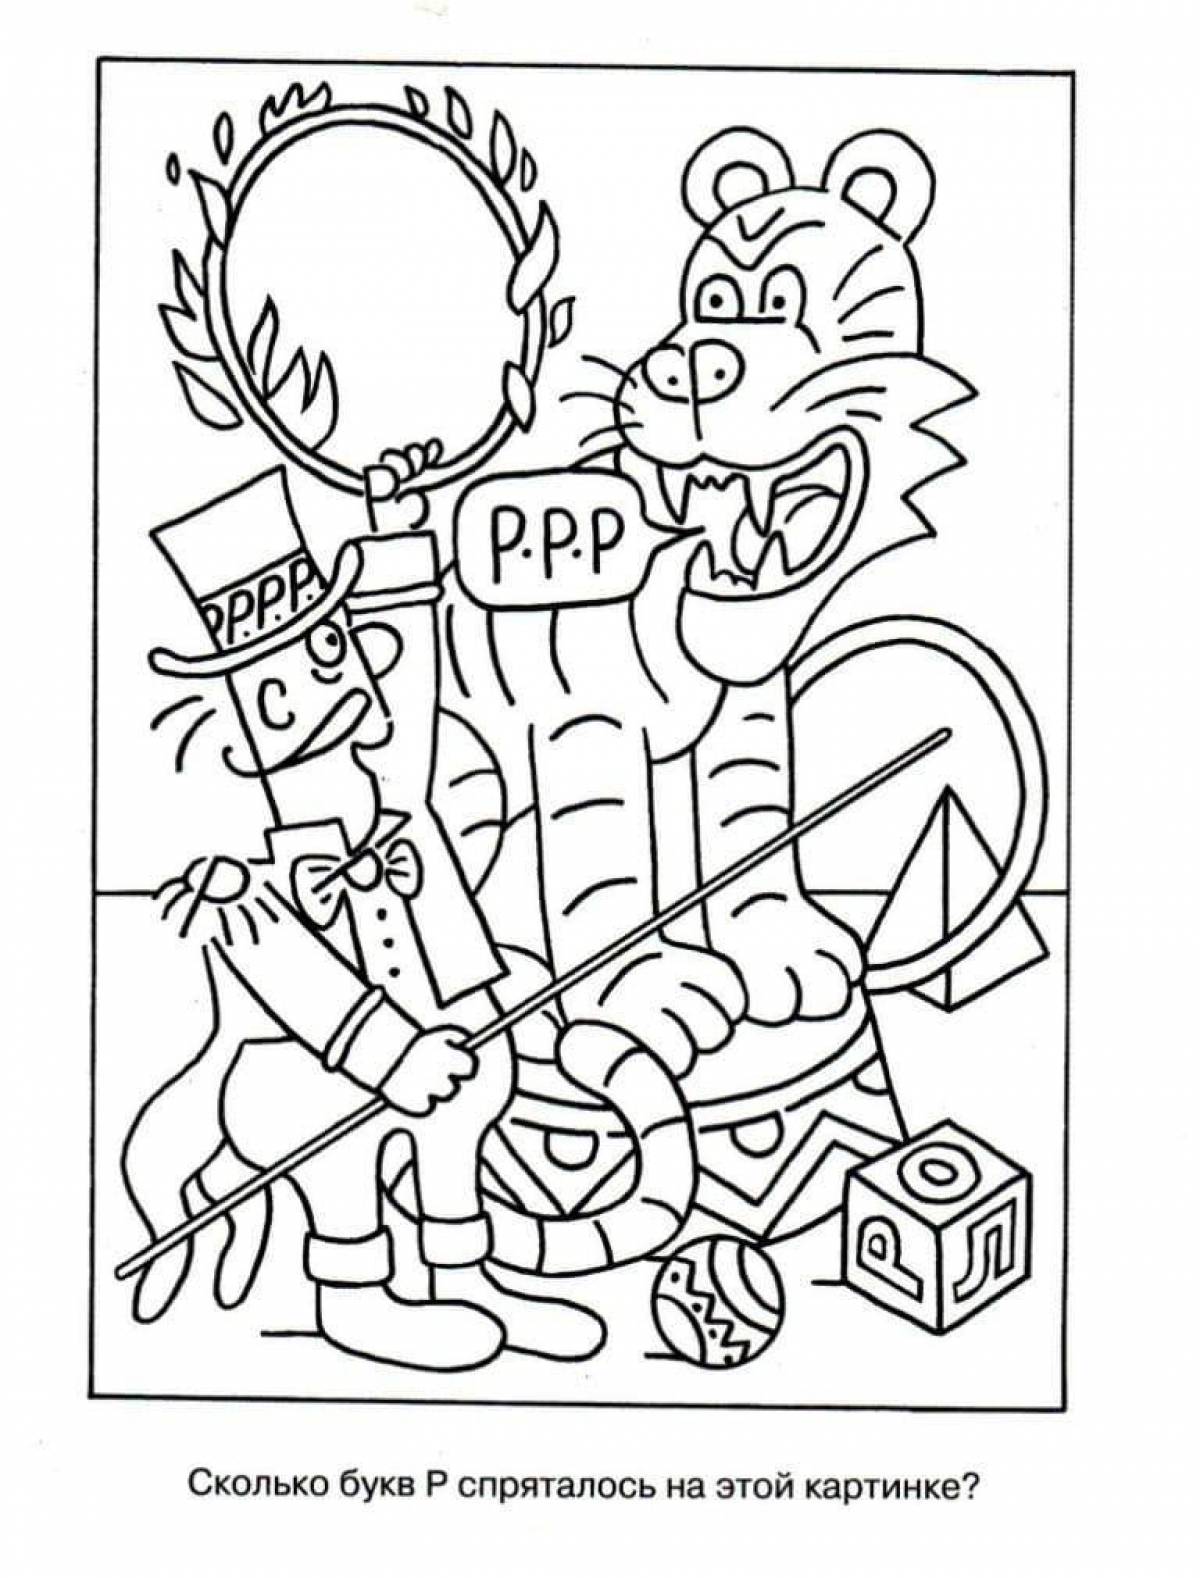 Great coloring book